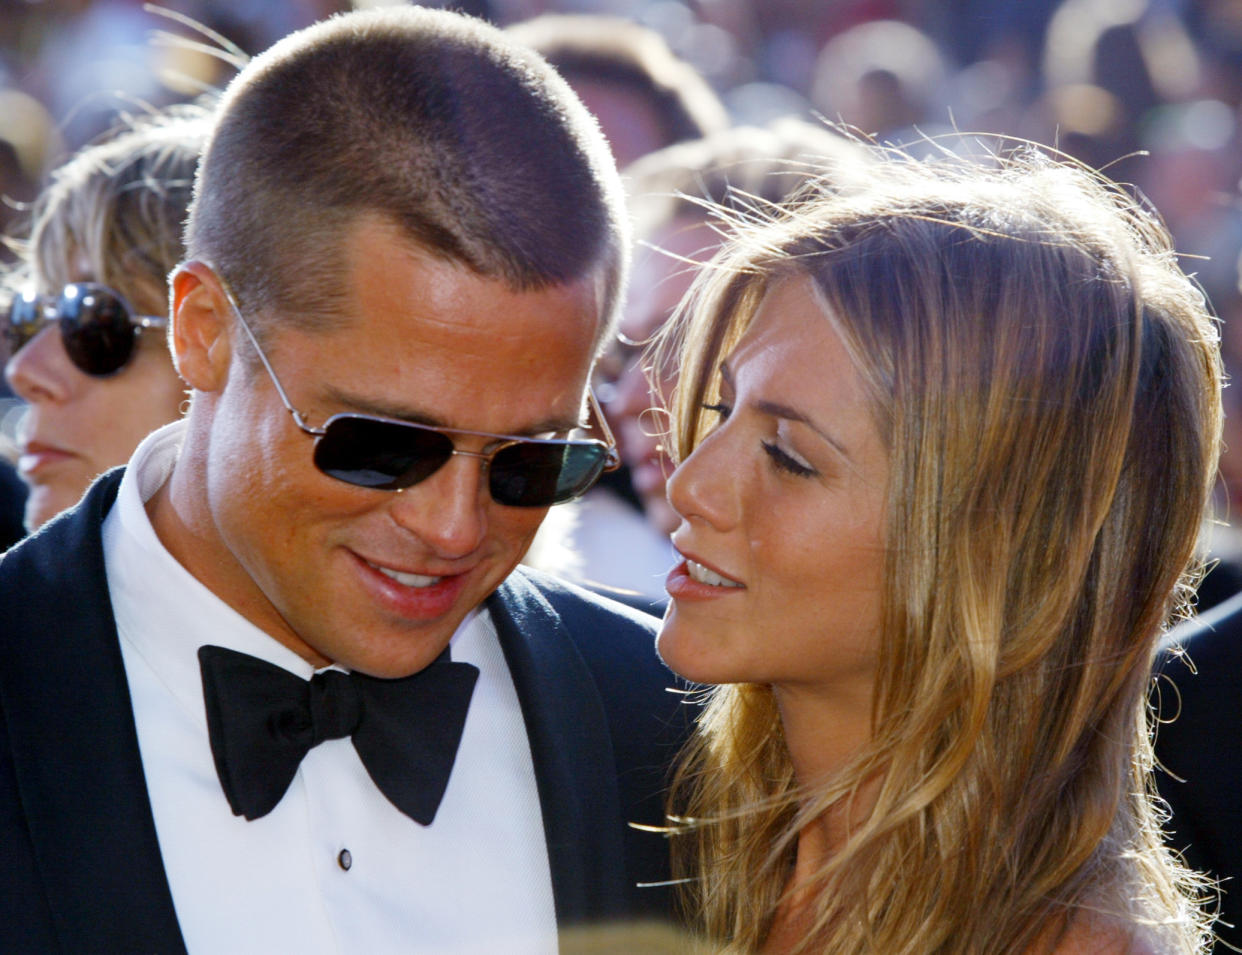 Brad Pitt and Jennifer Aniston arrive at the 56th annual Primetime Emmy Awards at the Shrine Auditorium in Los Angeles, in this September 19, 2004 file photo. Jennifer Aniston filed for divorce on March 25, 2005 from Brad Pitt, some two and a half months after Hollywood's golden couple announced they were separating, court papers in Los Angeles showed. REUTERS/Kimberly White/Files  SV/PN